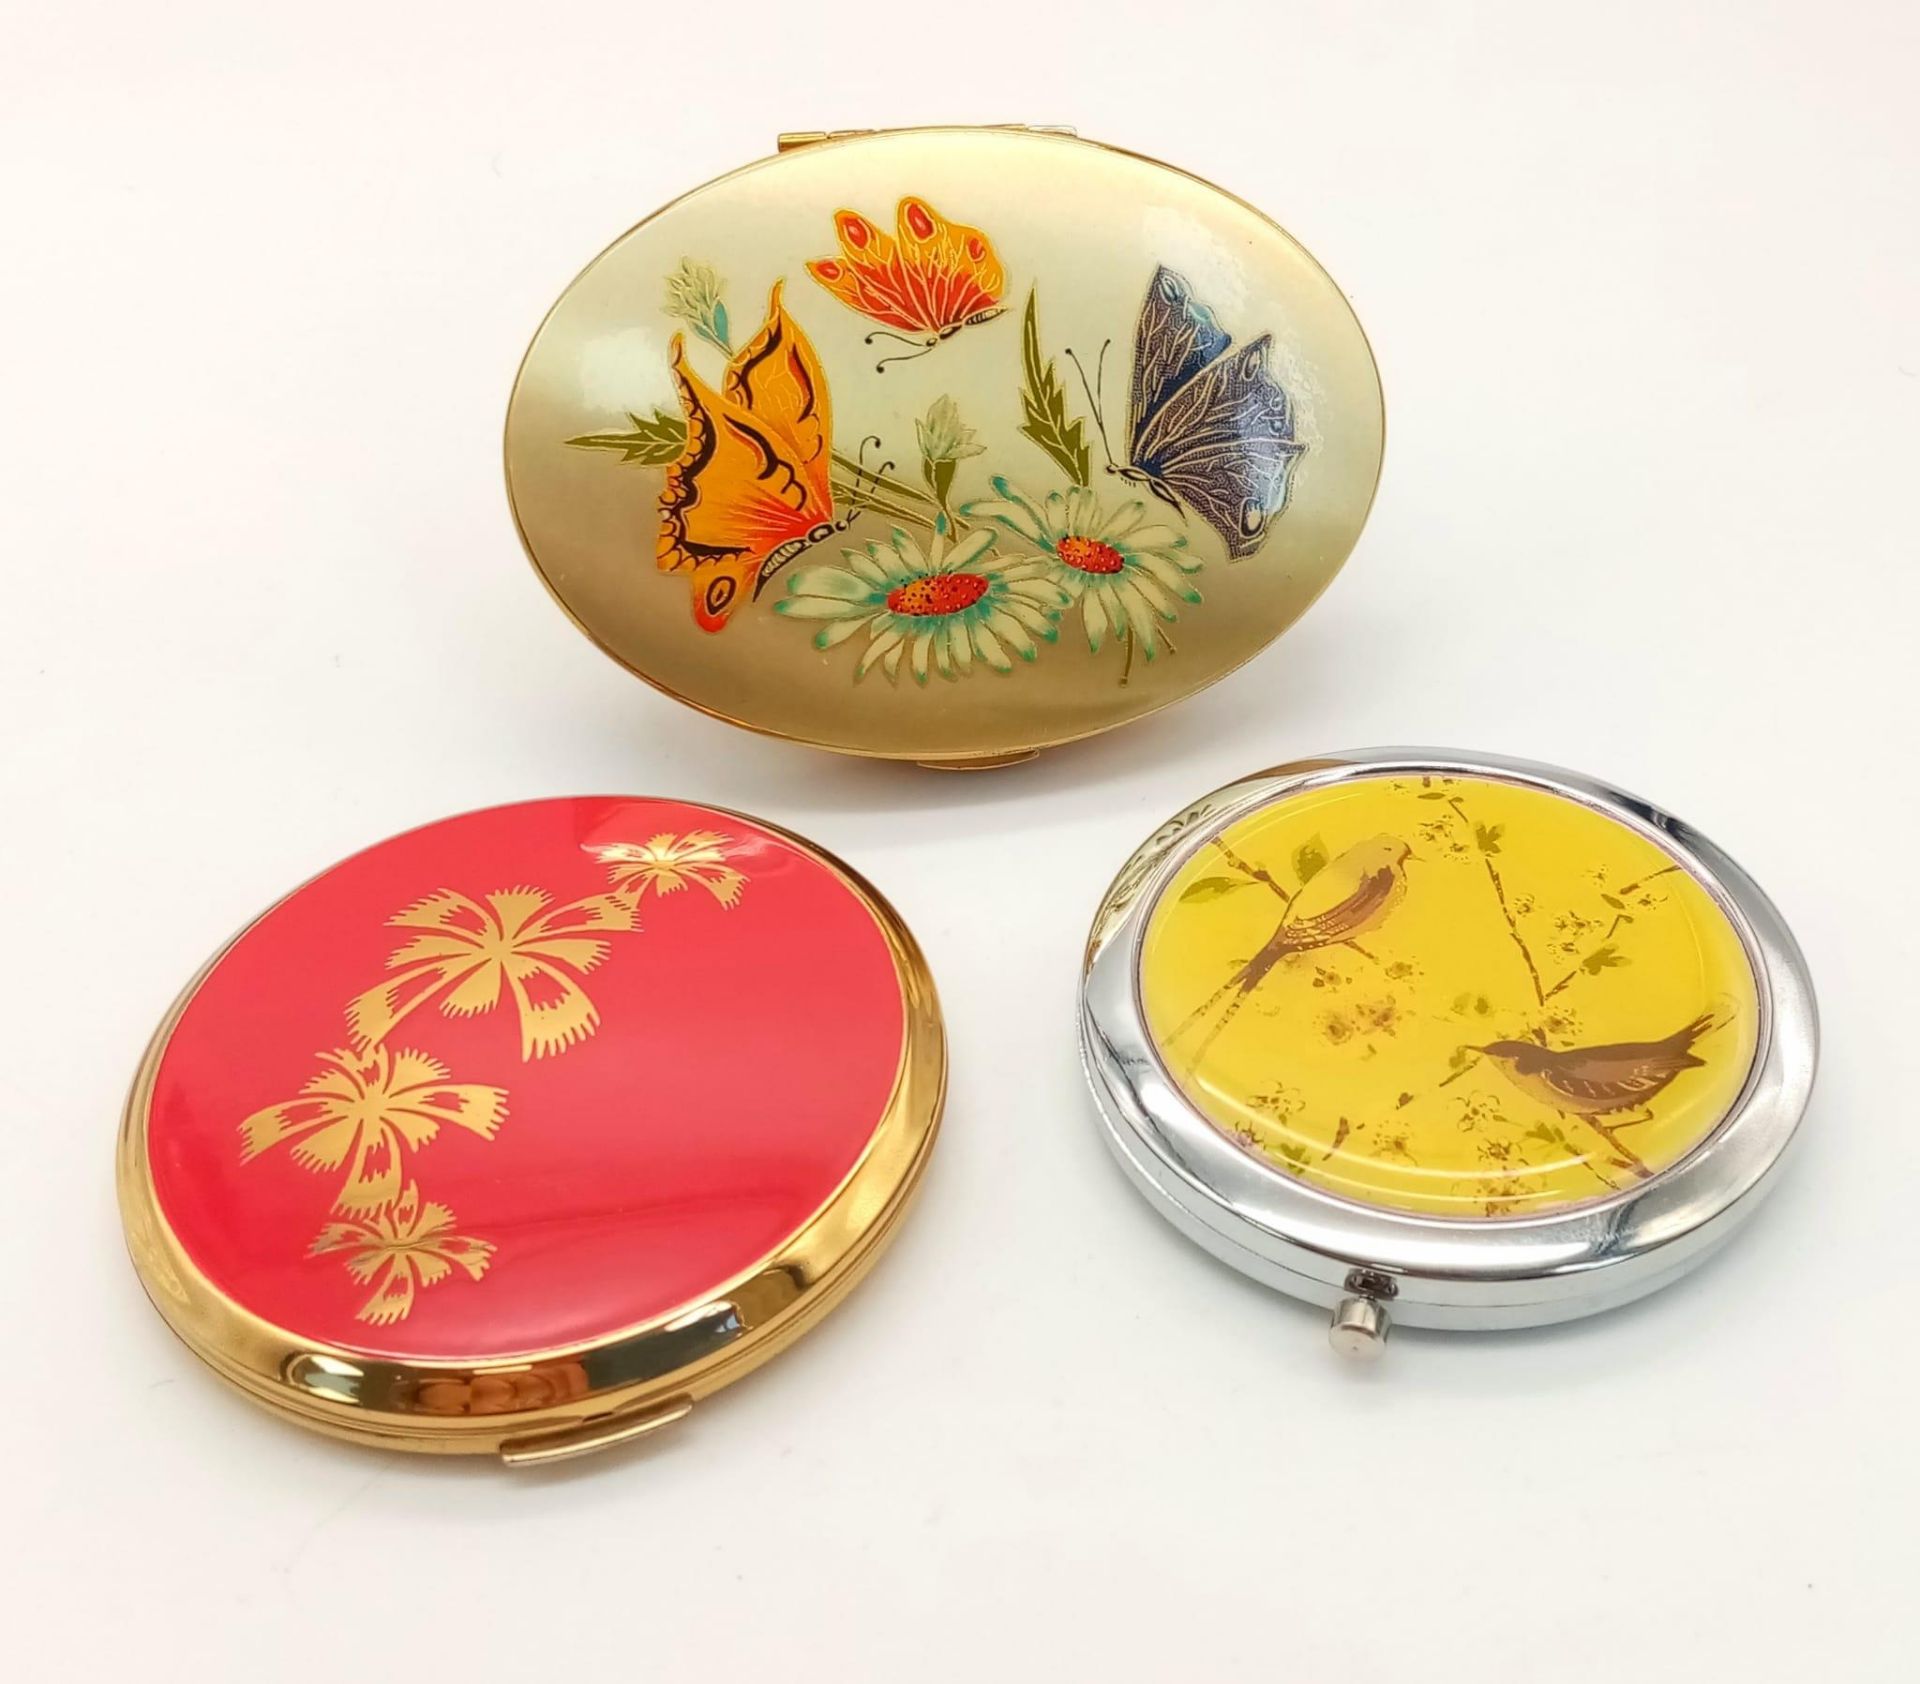 Three Vintage Compacts. Floral and wildlife decoration. All in good condition. One compact is a